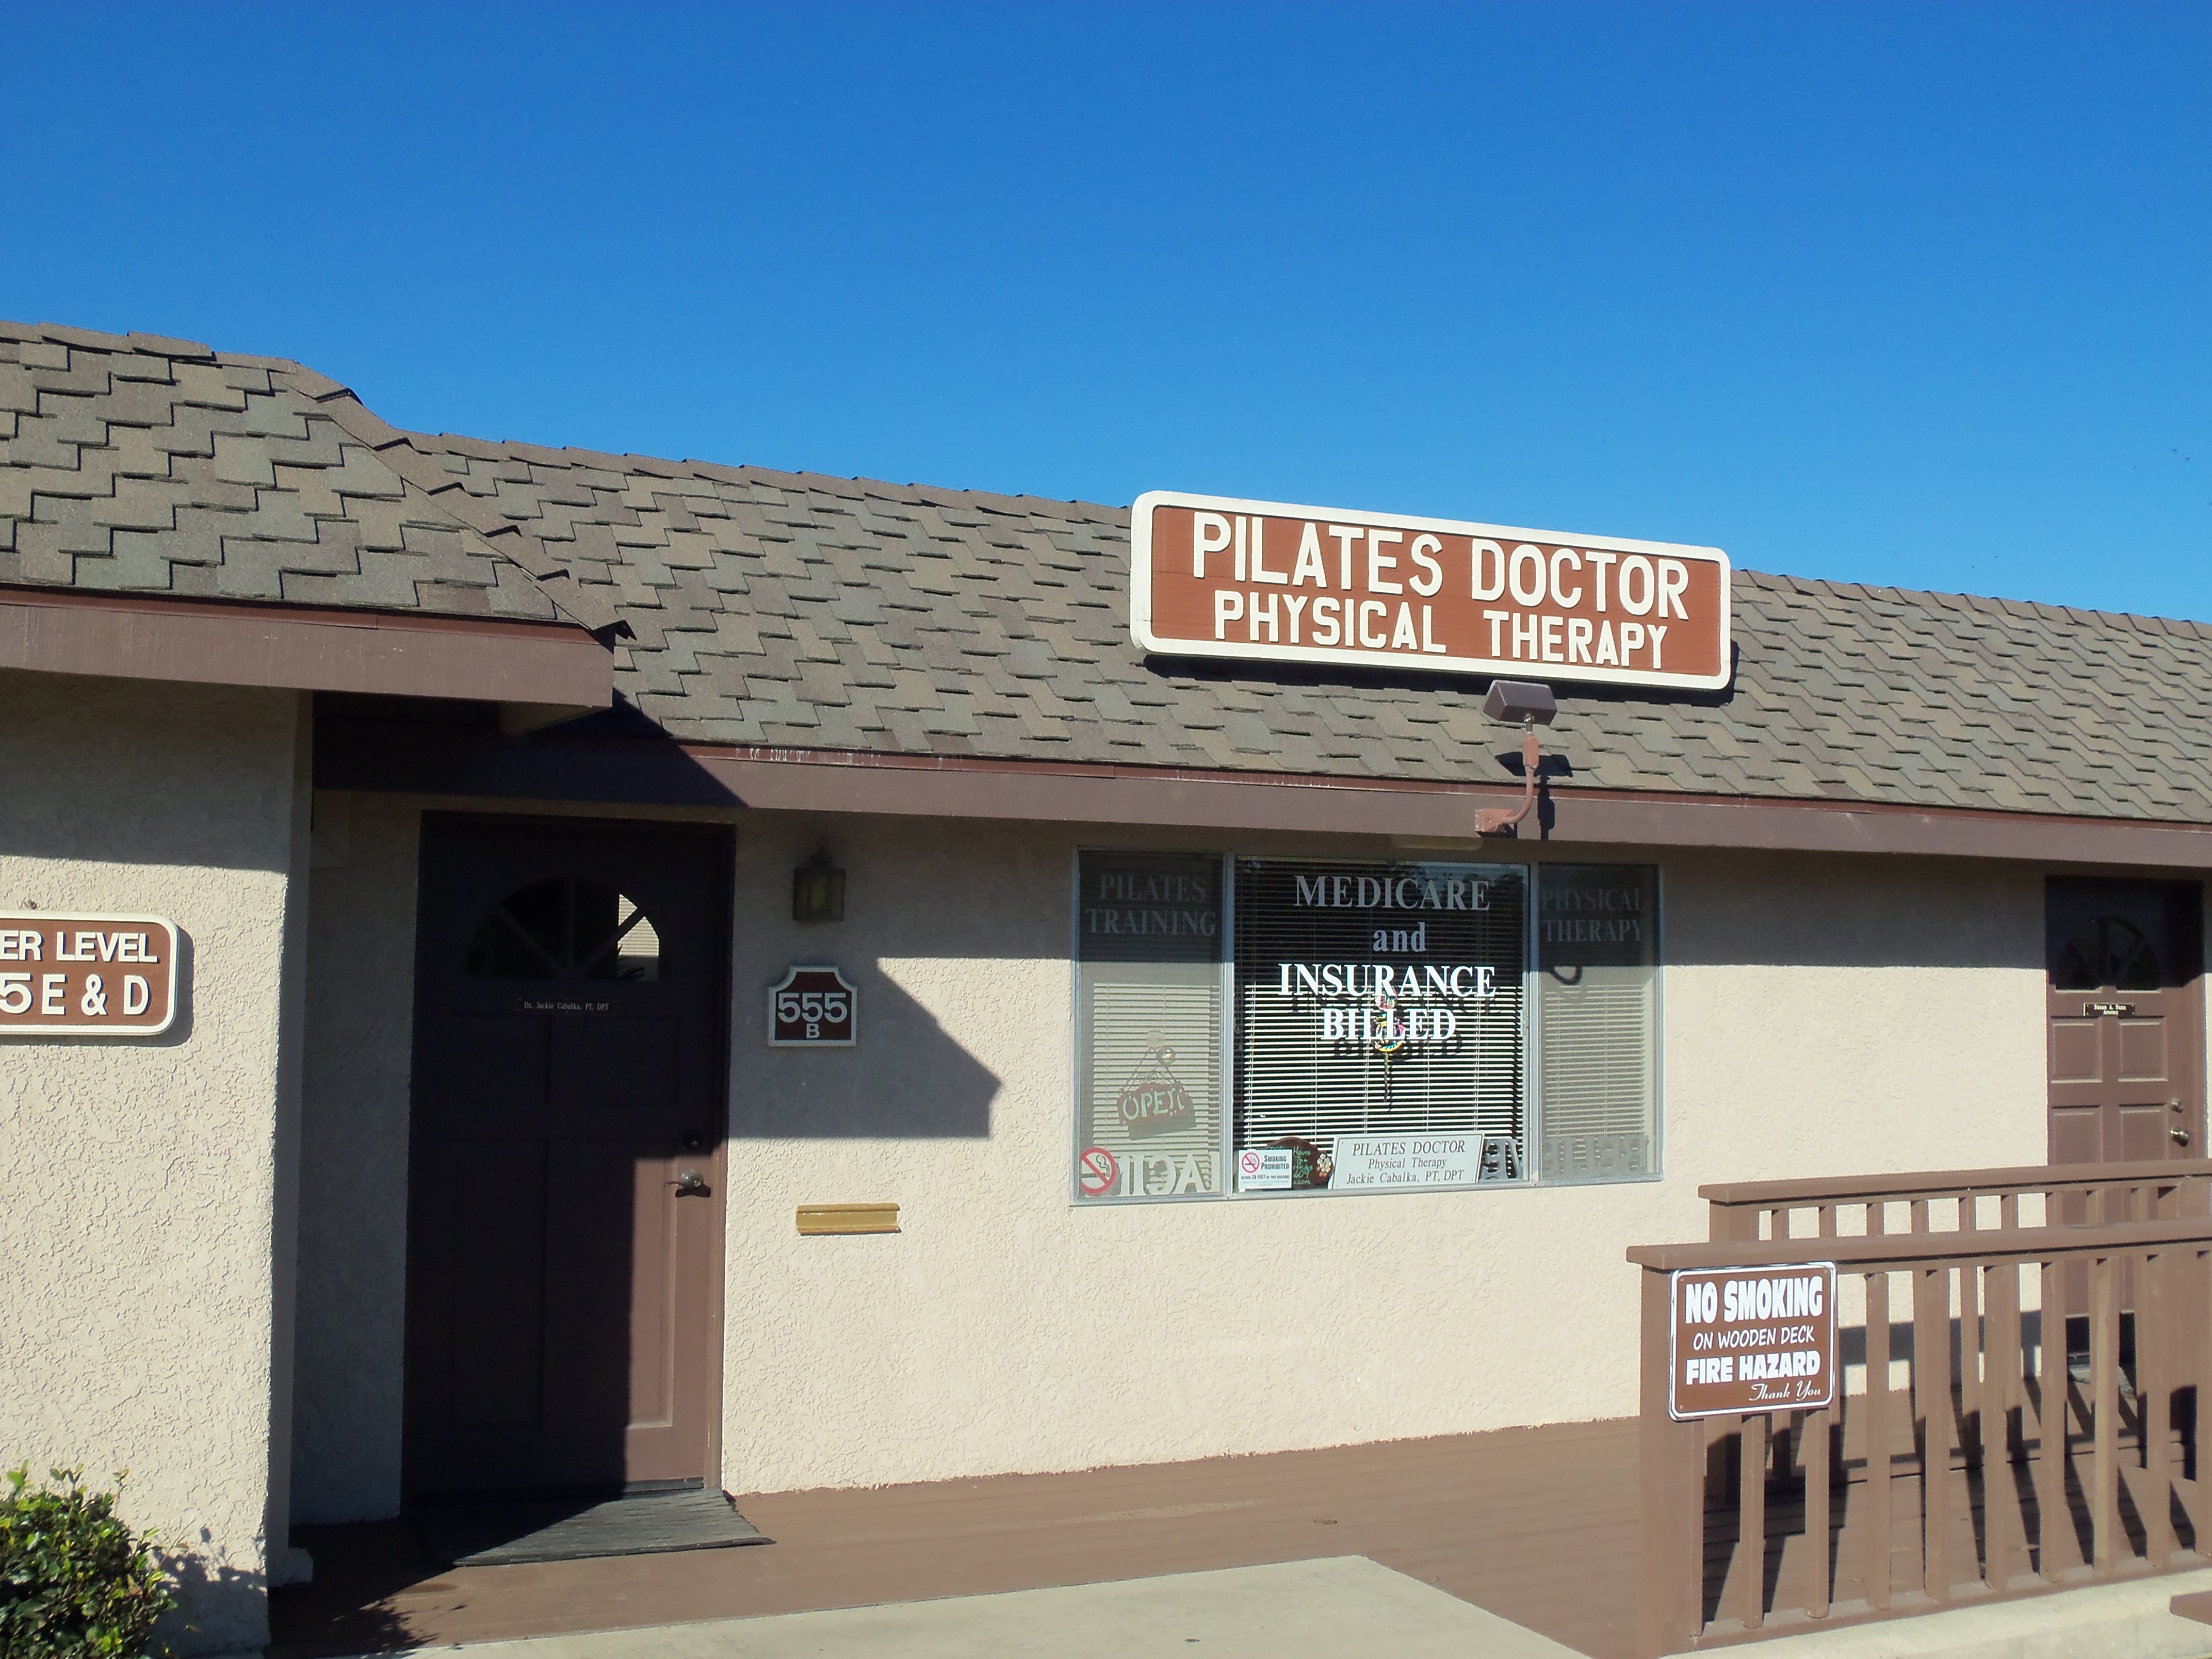 Pilates Doctor Physical Therapy Old Orcutt